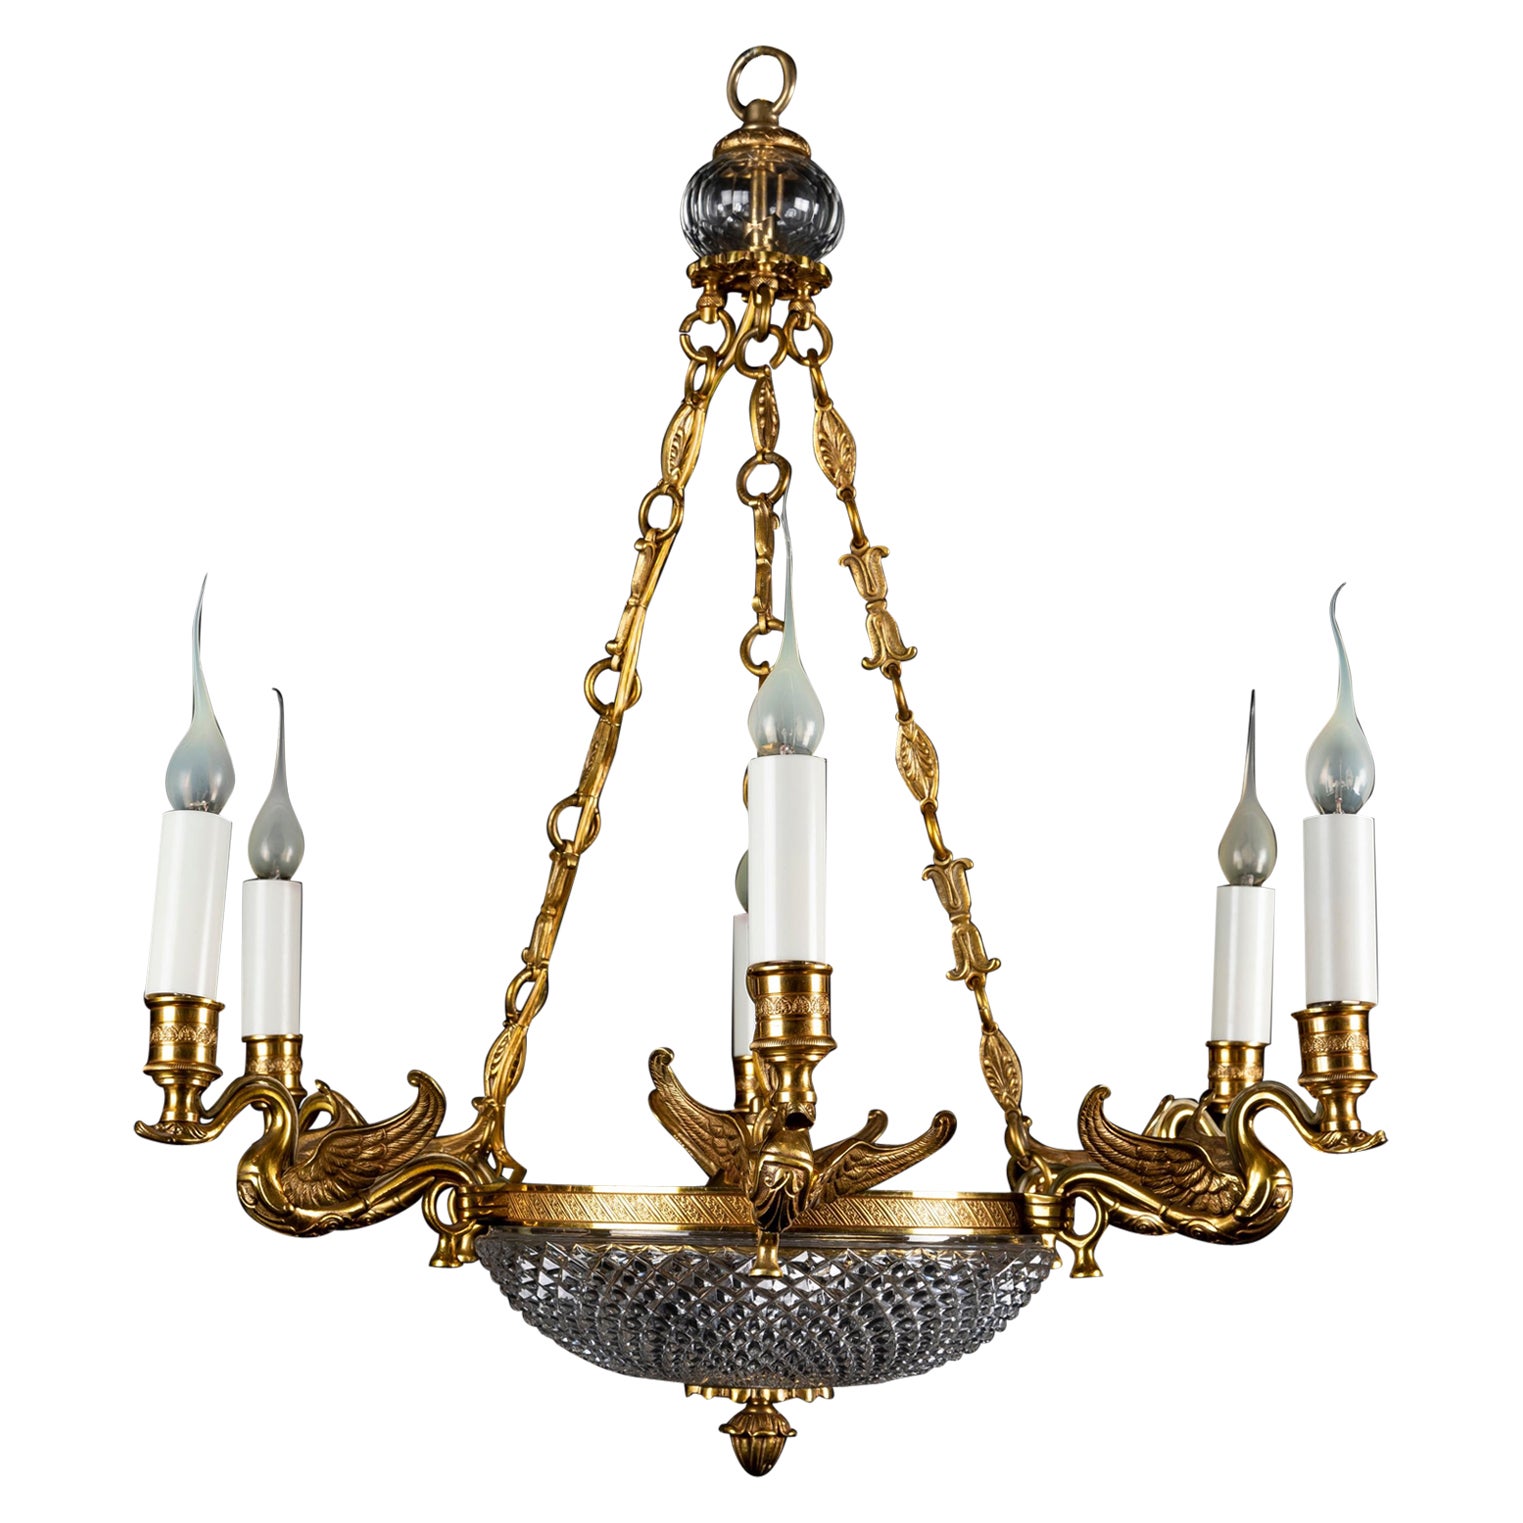 A Fine French Empire Style Gilt Bronze and Crystal Swan Chandelier For Sale